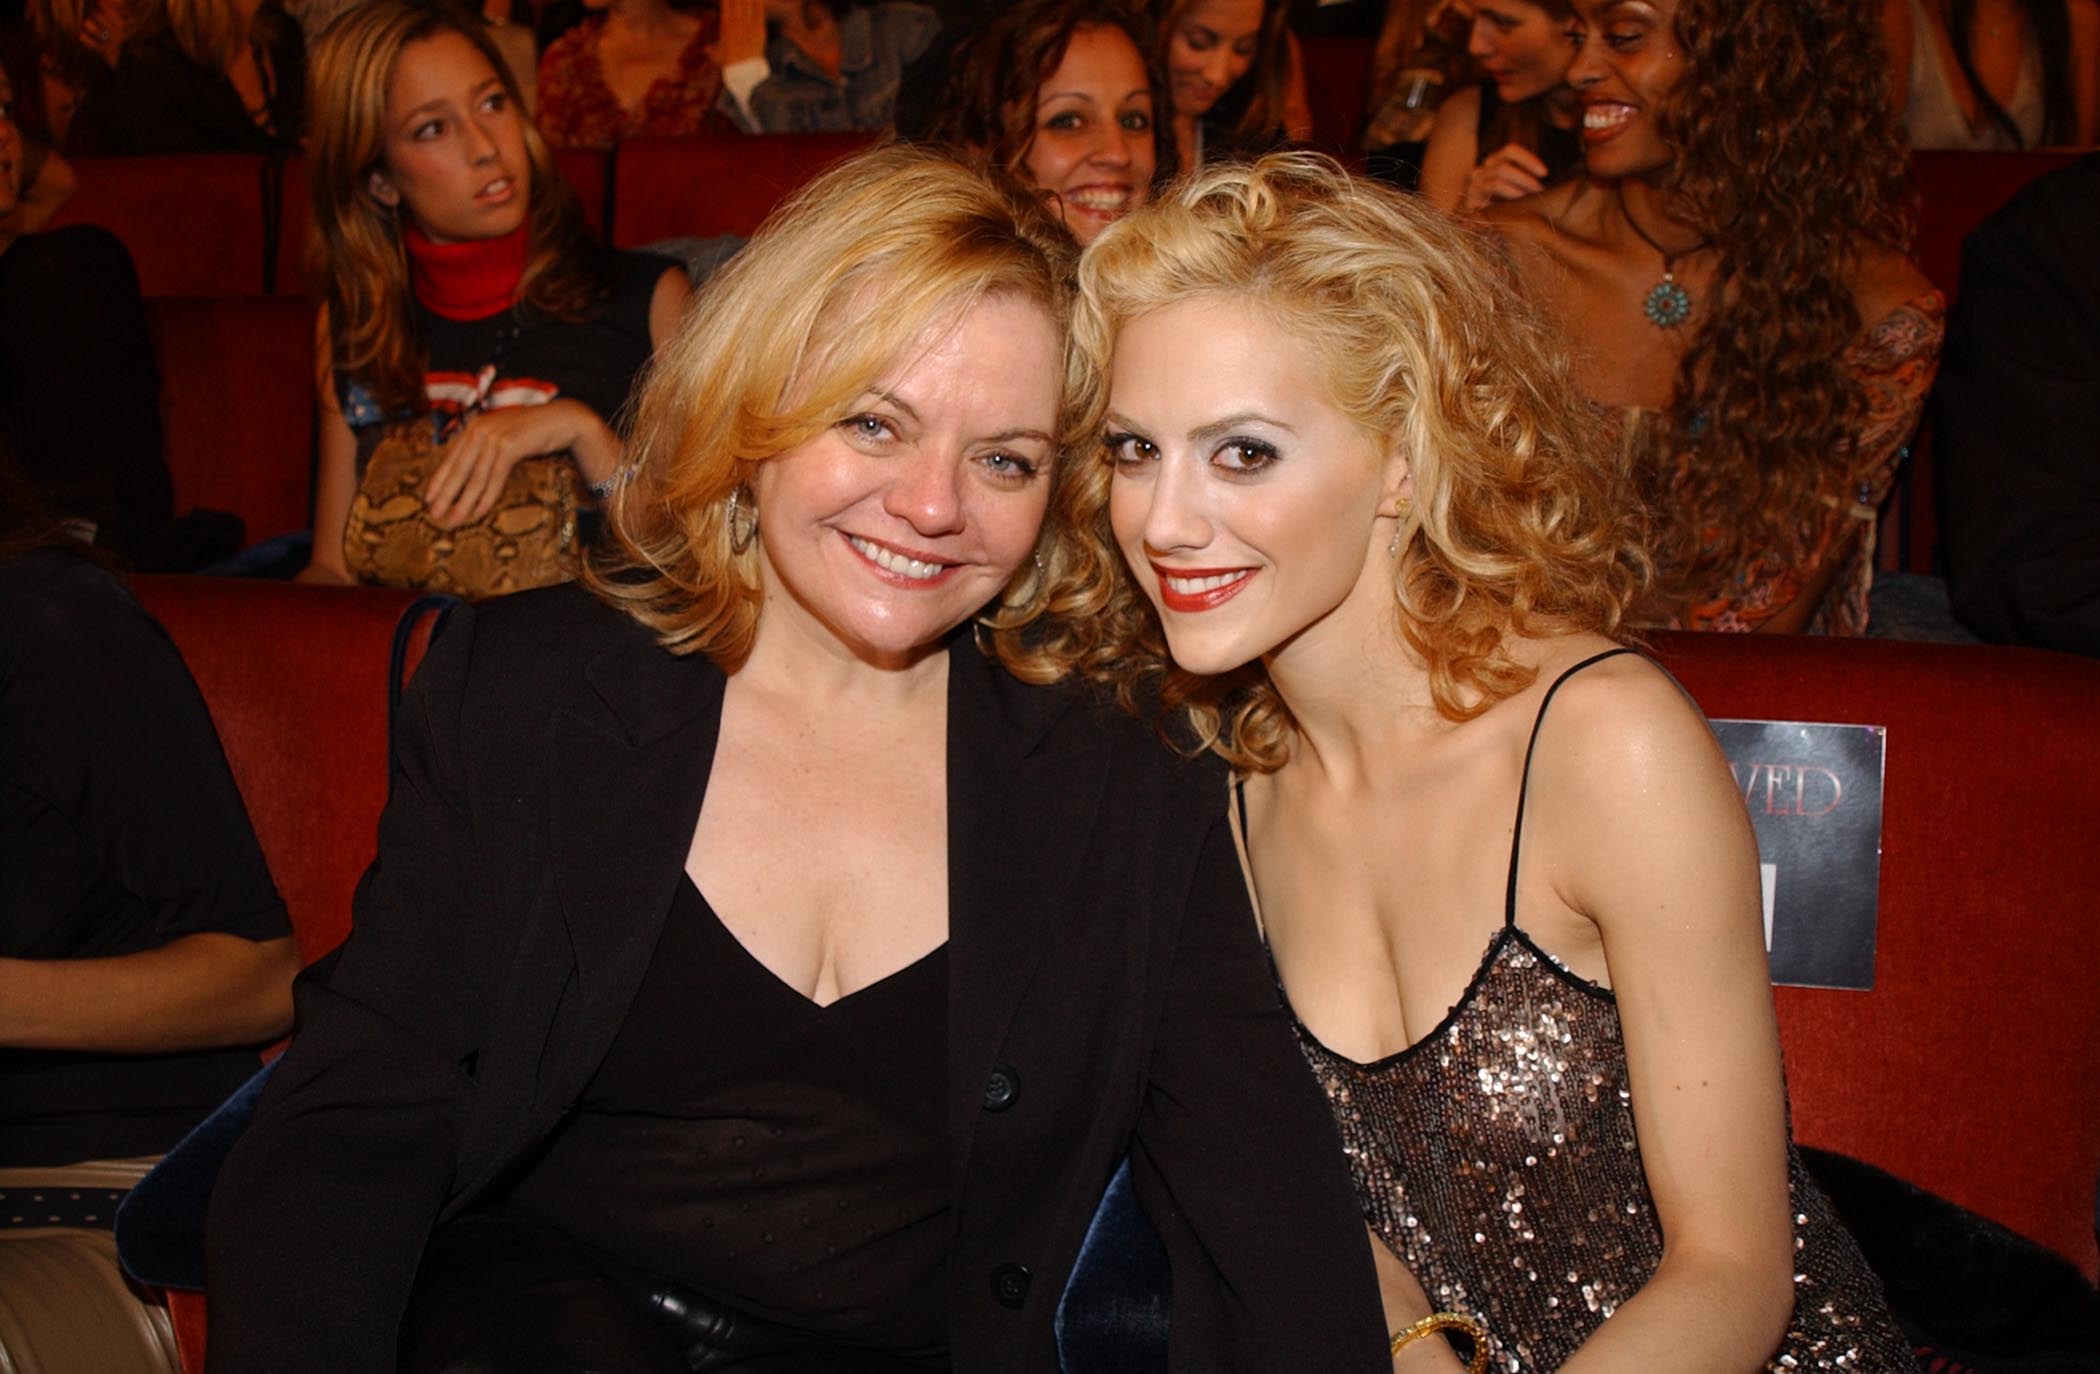 Sharon Murphy and Brittany Murphy during 2002 VH1 Vogue Fashion Awards in New York | Photo: Getty Images